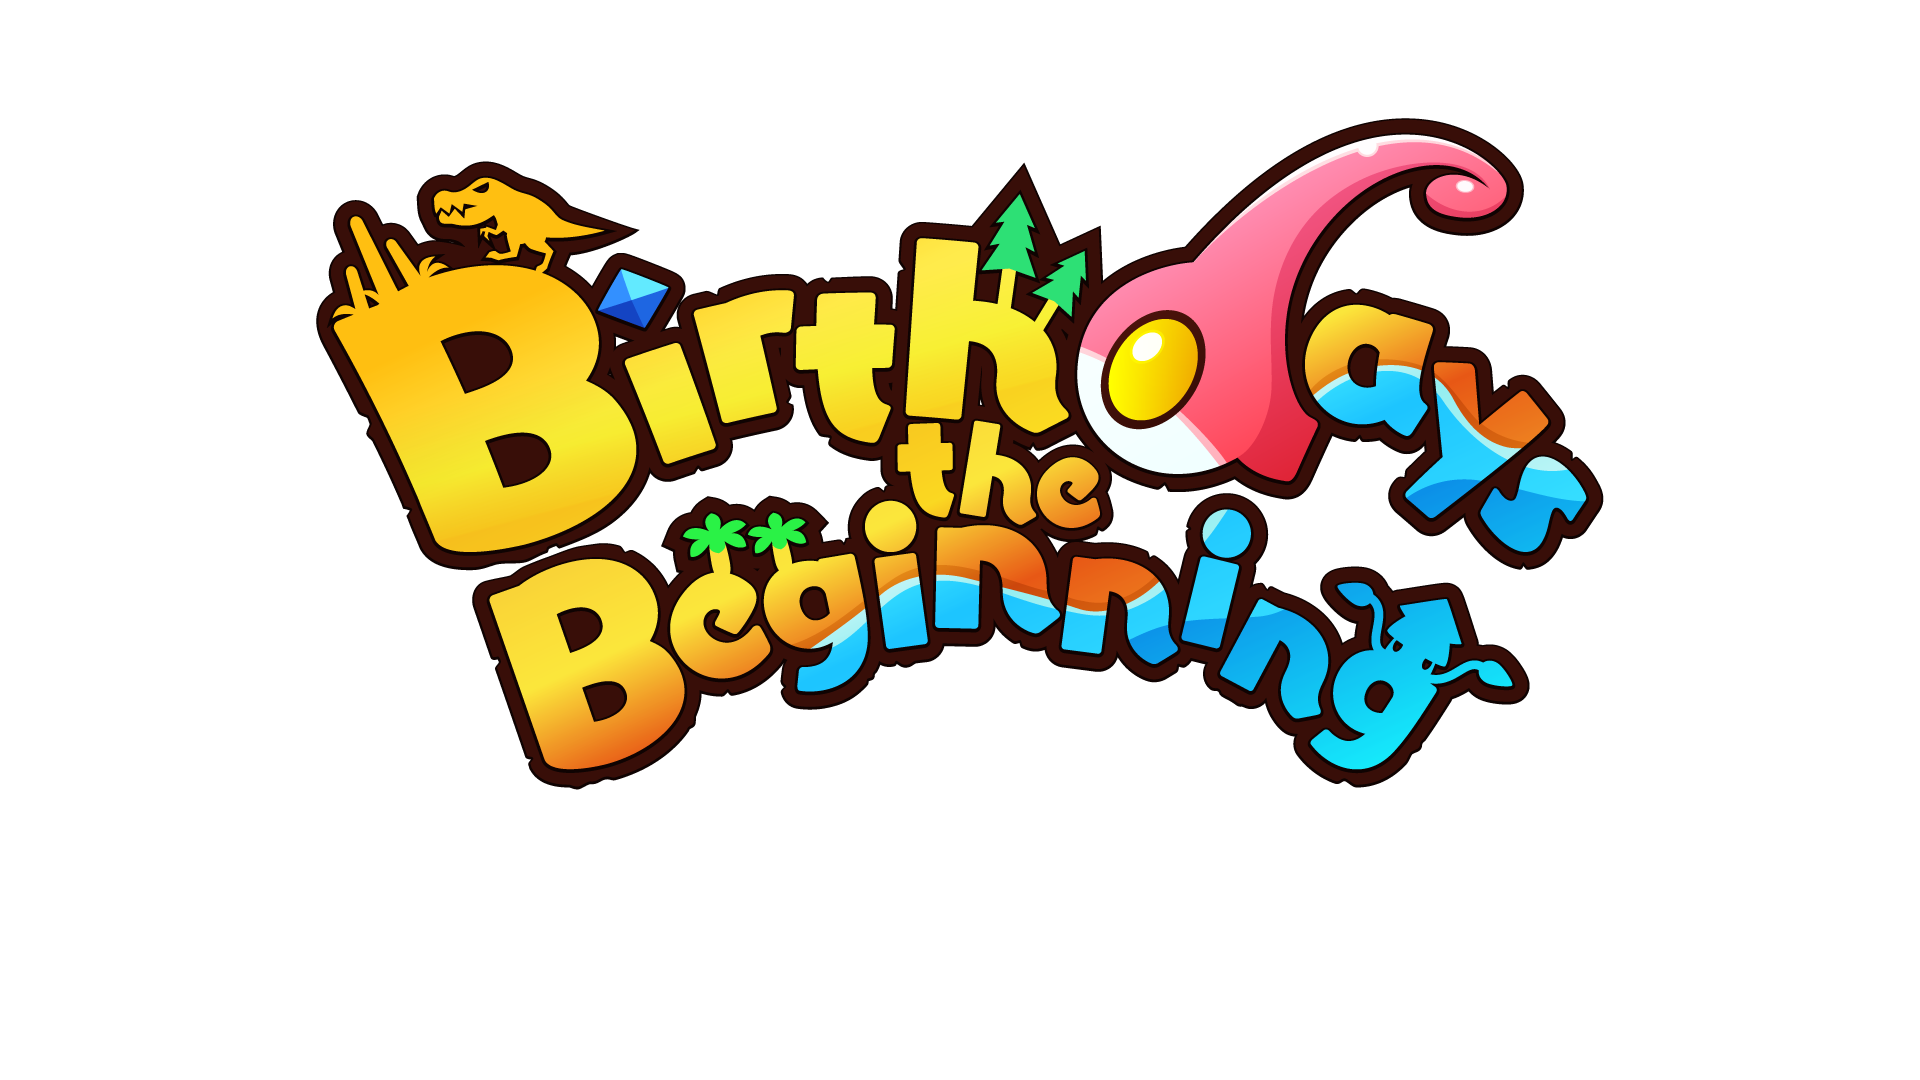 BirtHDays The Beginning Out Now In Europe For Ps4 Of